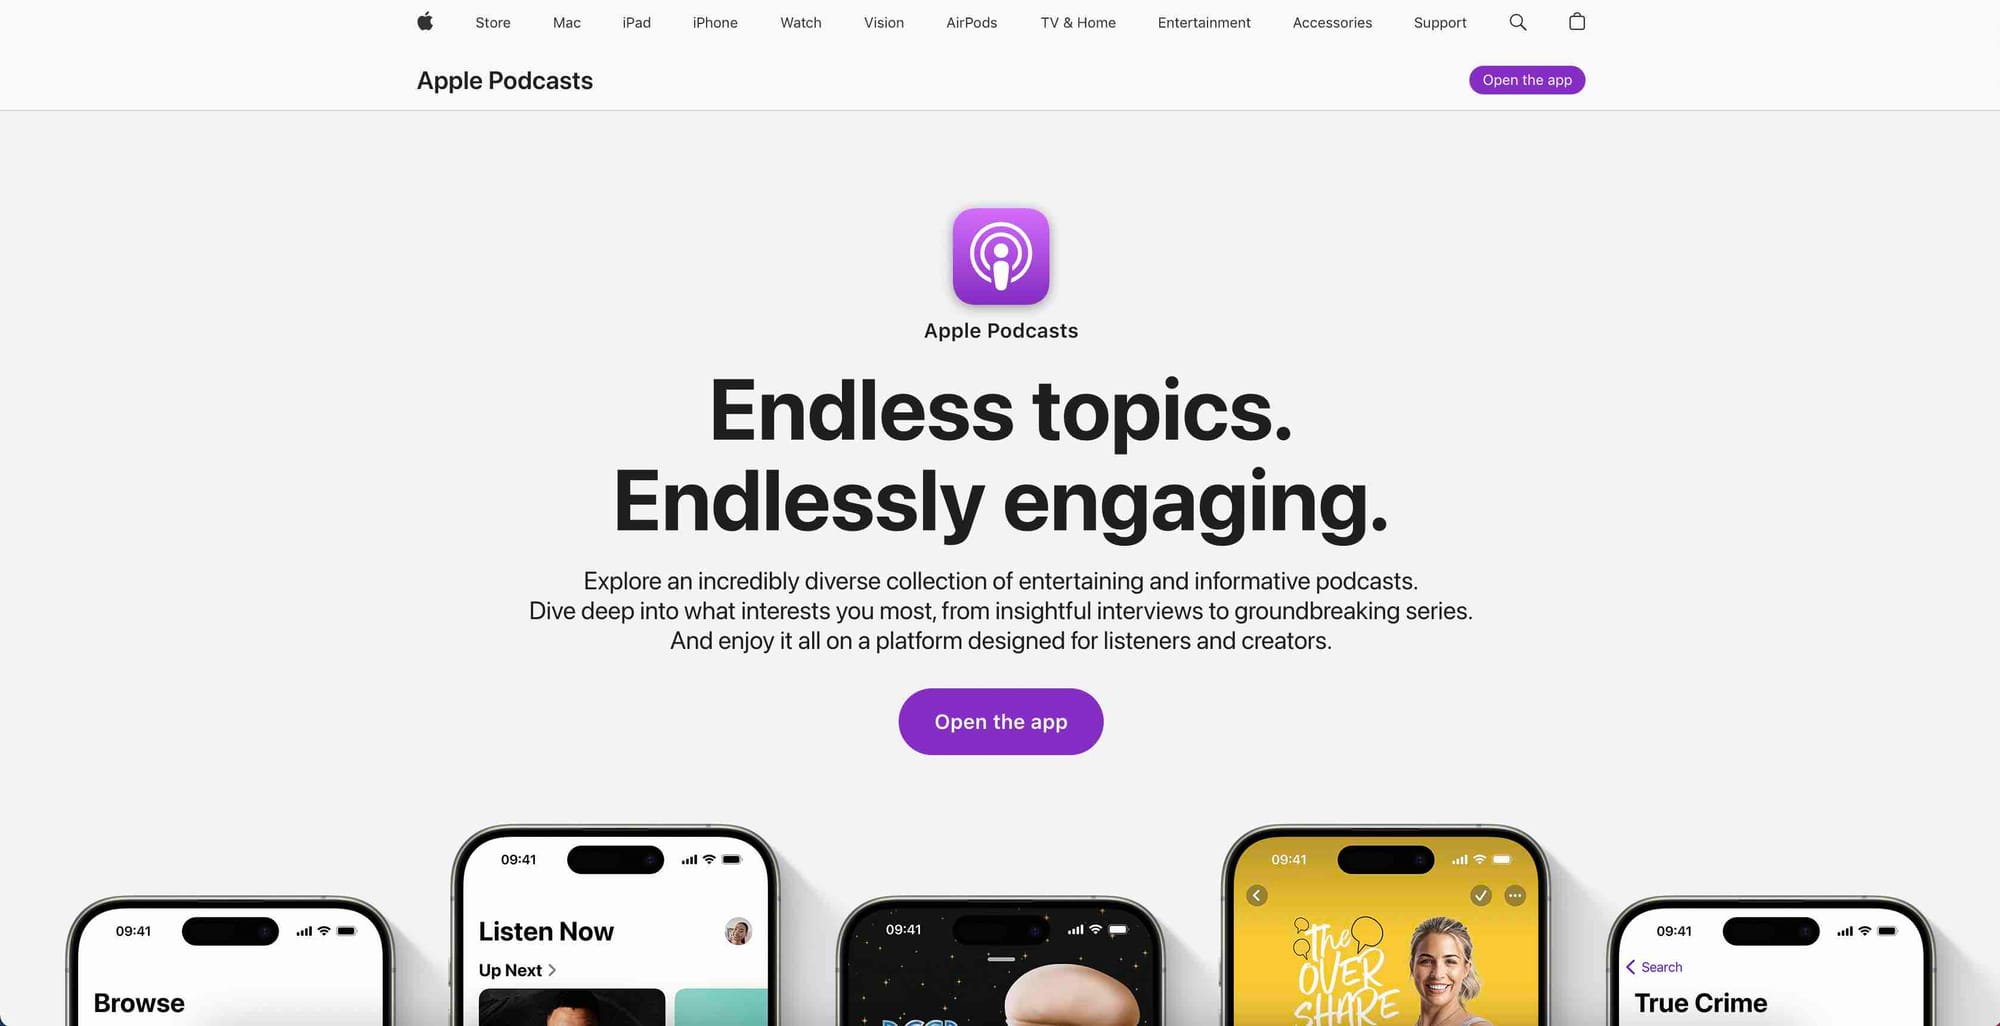 Apple Podcasts' homepage